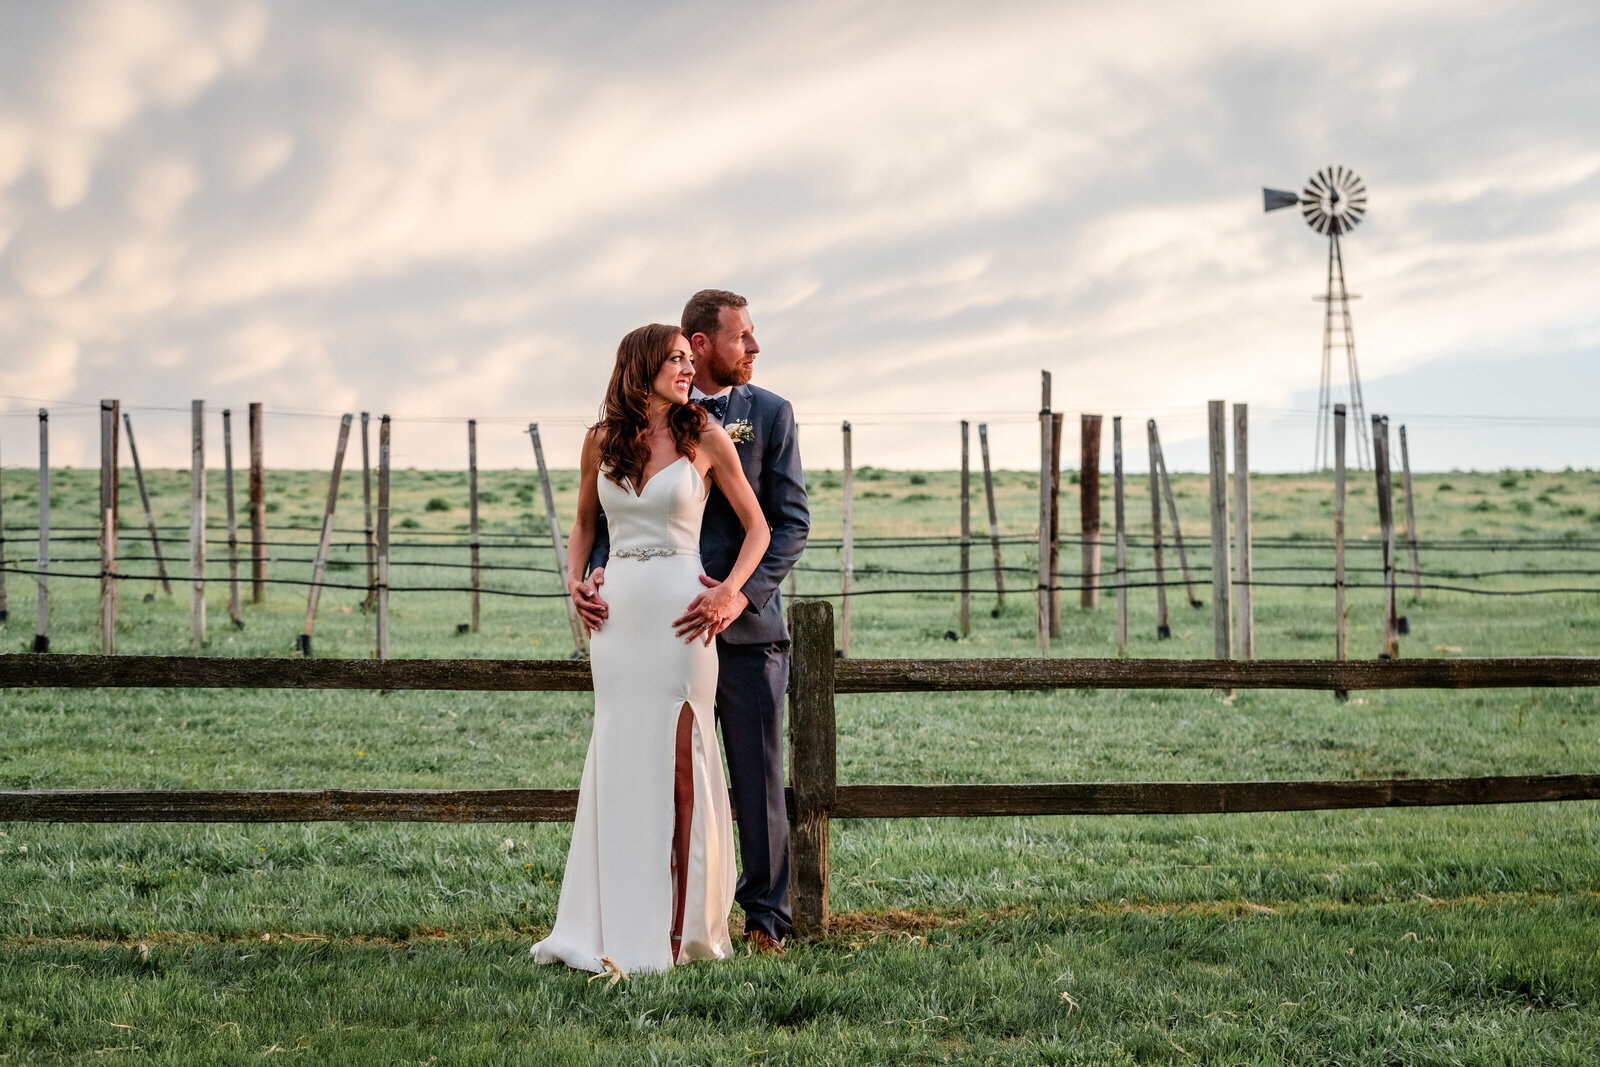 Bride and Groom with windmill in background